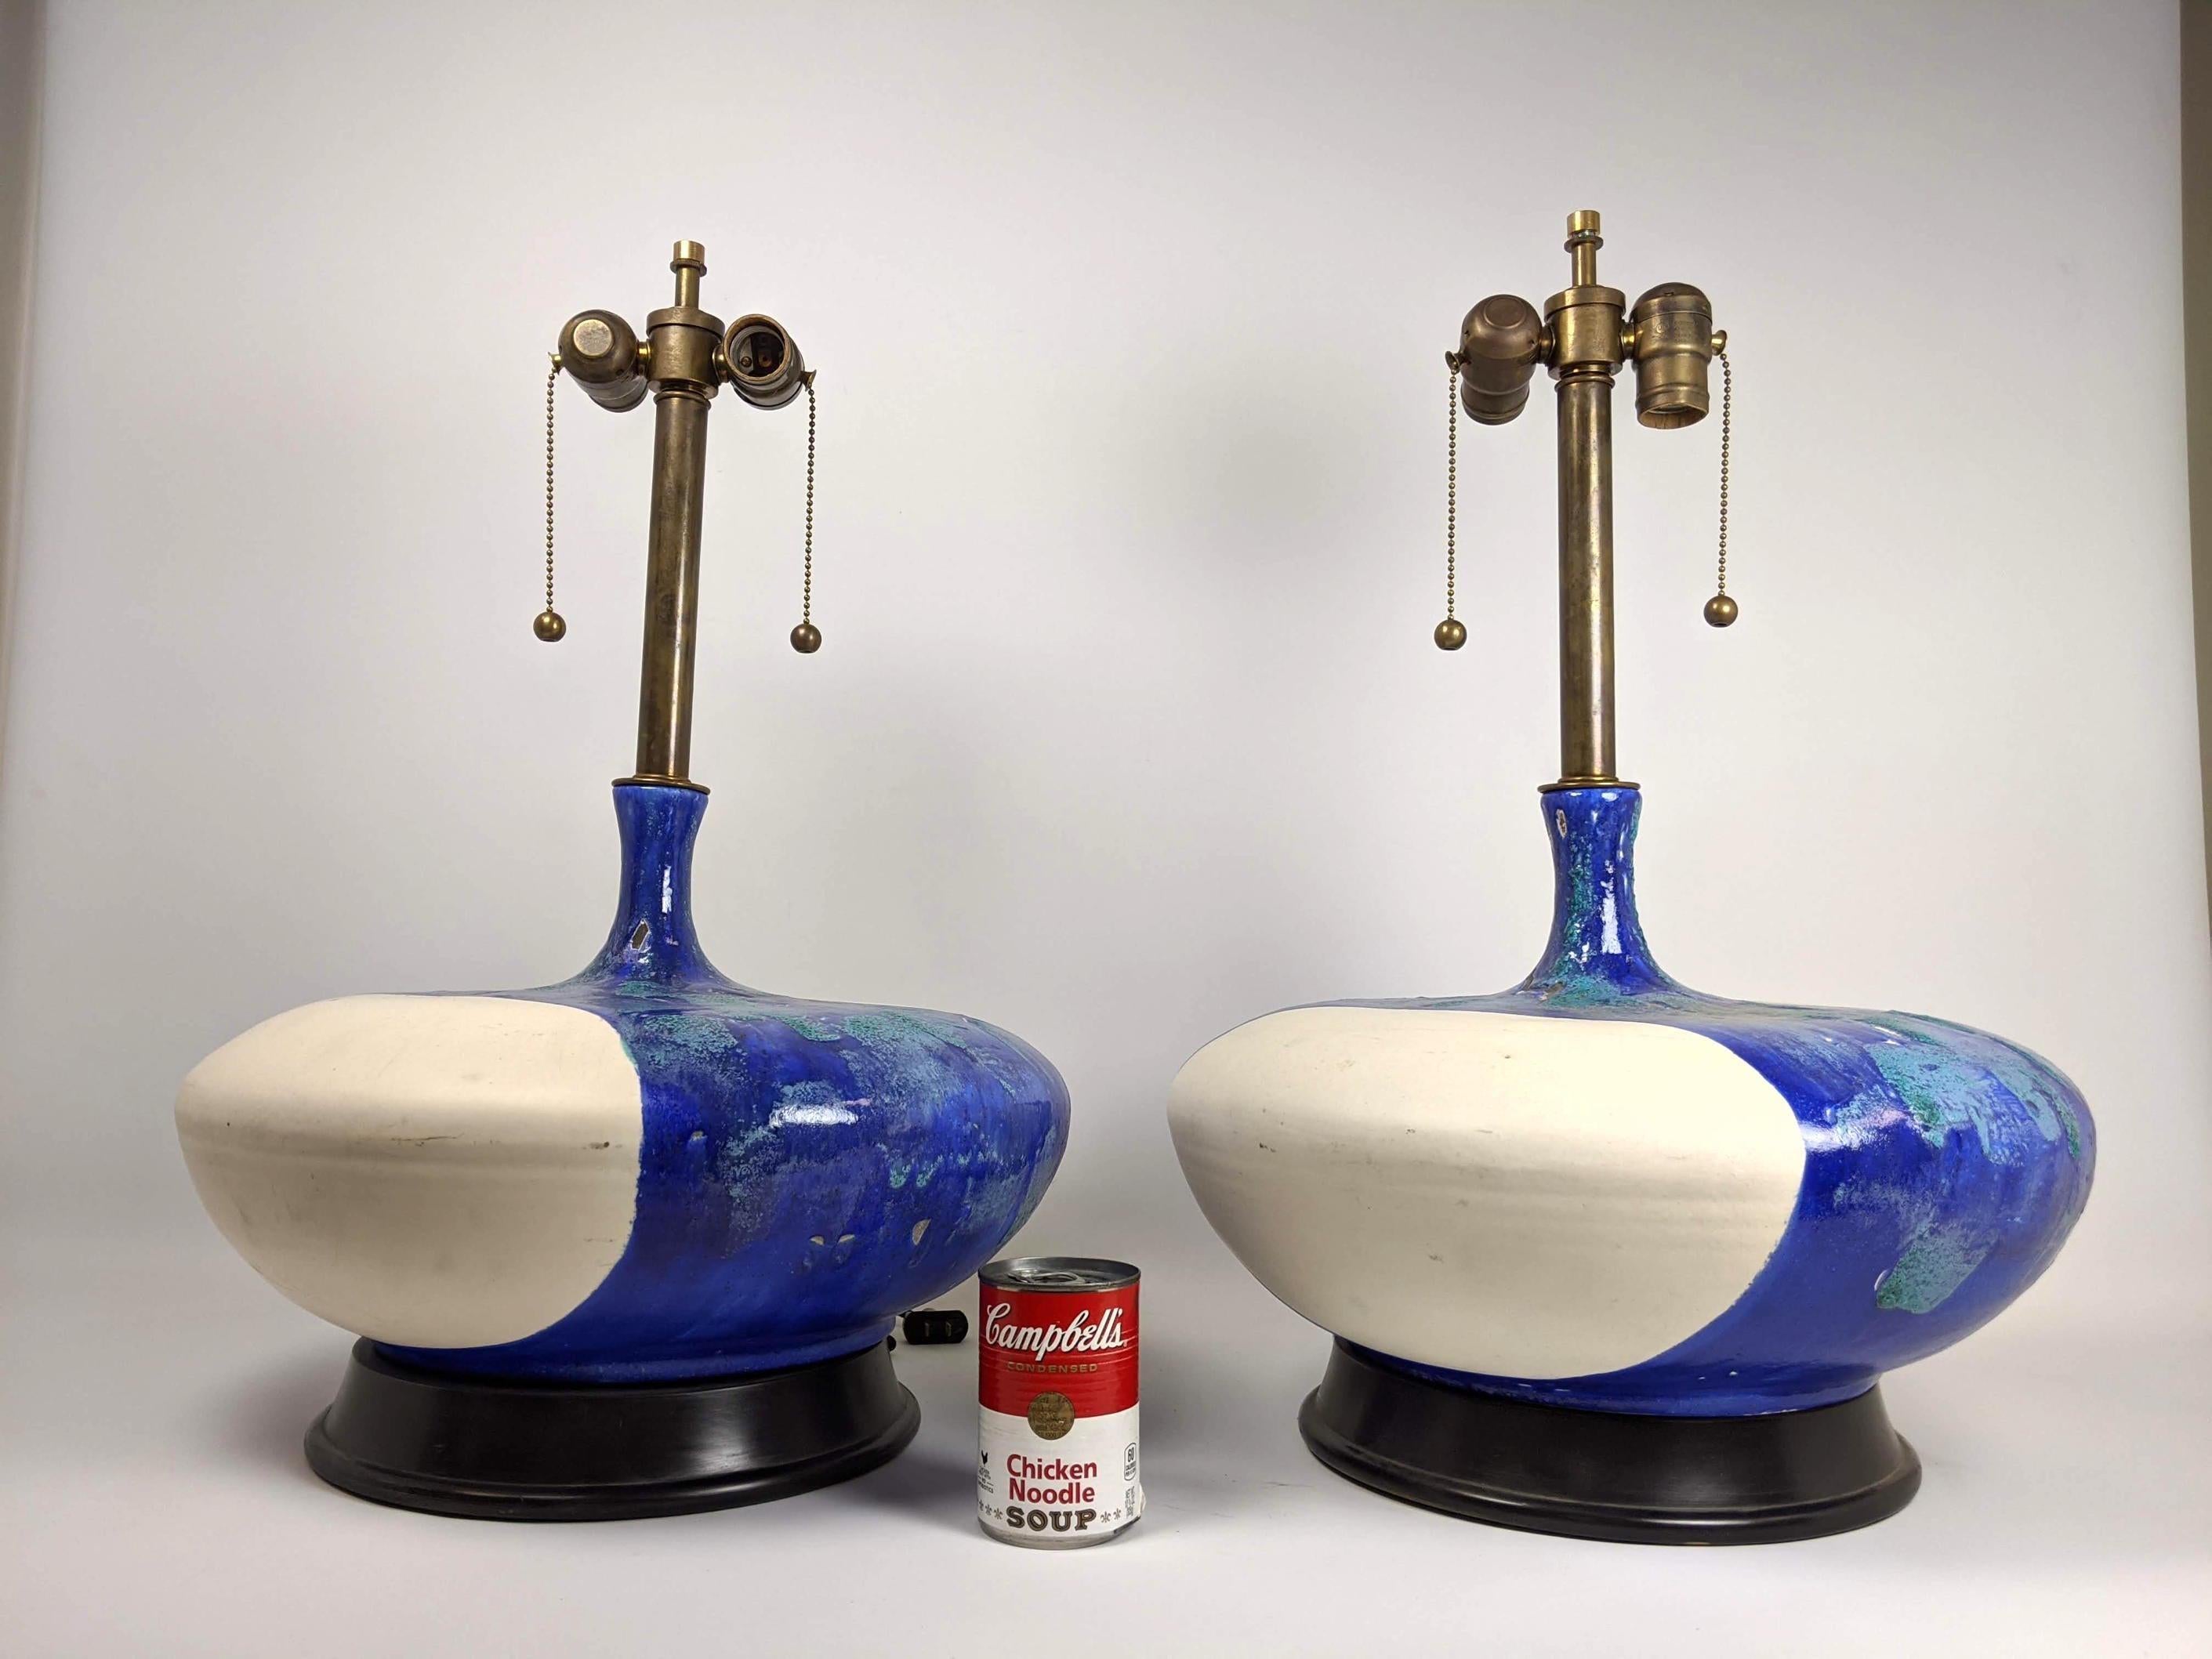 Pair large pottery table lamps. Wide bases with blue lava glaze. Very artful design and we love the look and texture the thick glaze. Shades are not included.
   
   